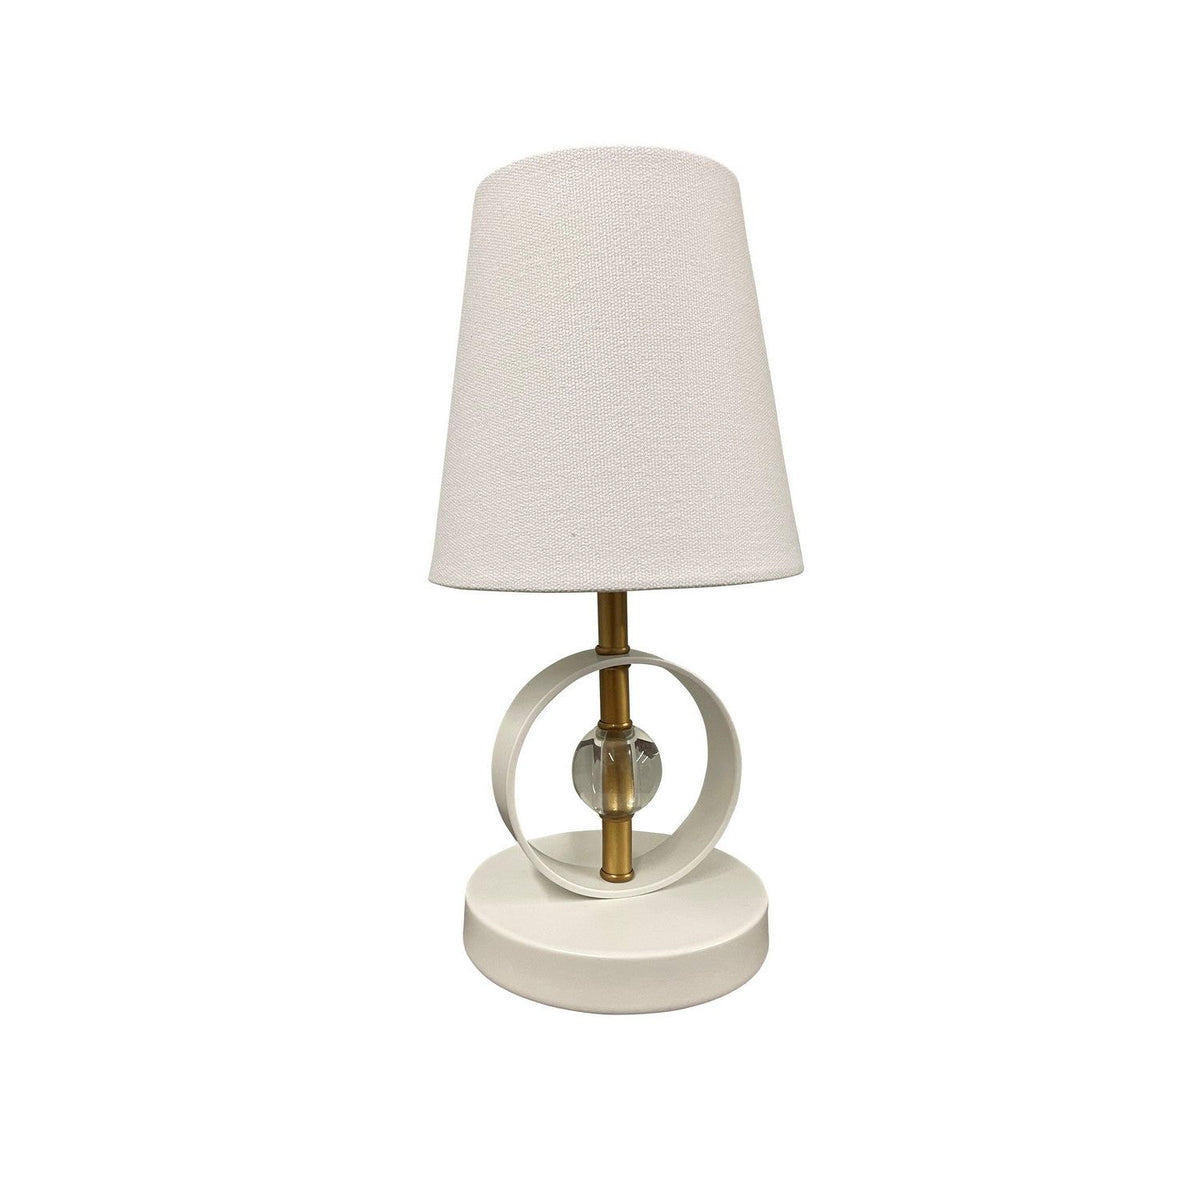 House of Troy - B210-WB/WT - One Light Accent Lamp - Bryson - Weathered Brass/White